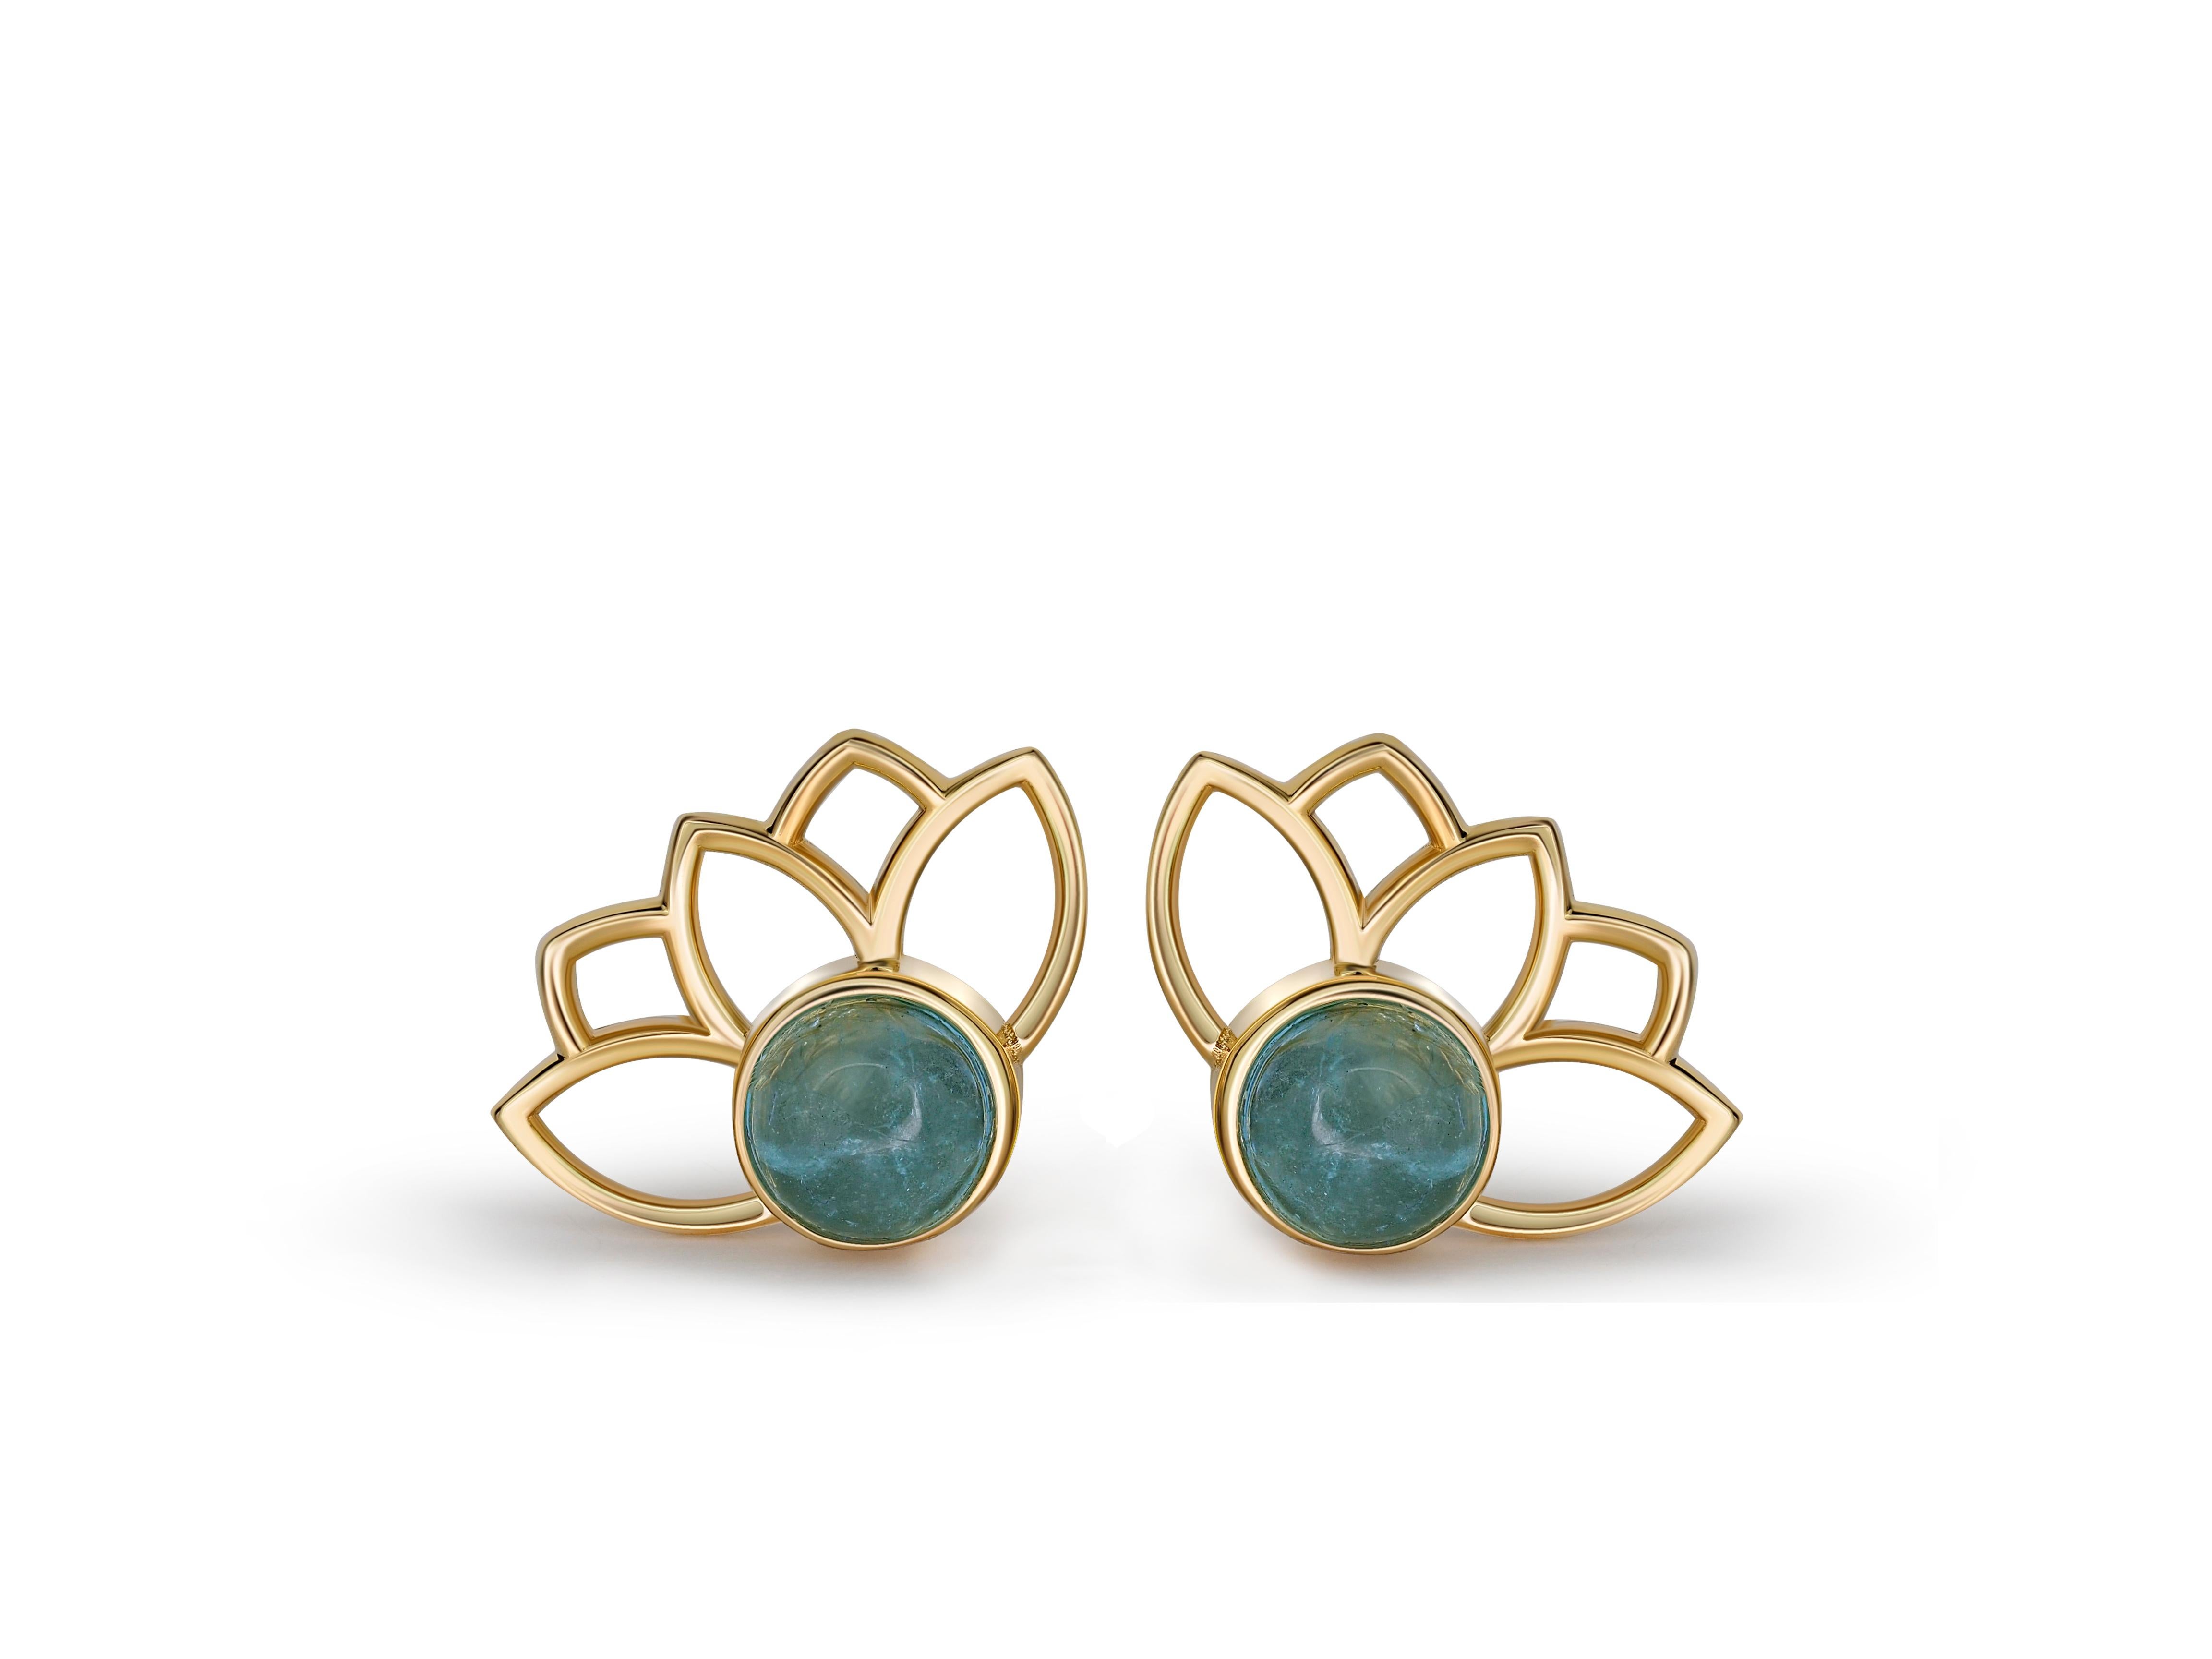 Cabochon Lotus Earrings Studs with Aquamarines in 14K Gold For Sale